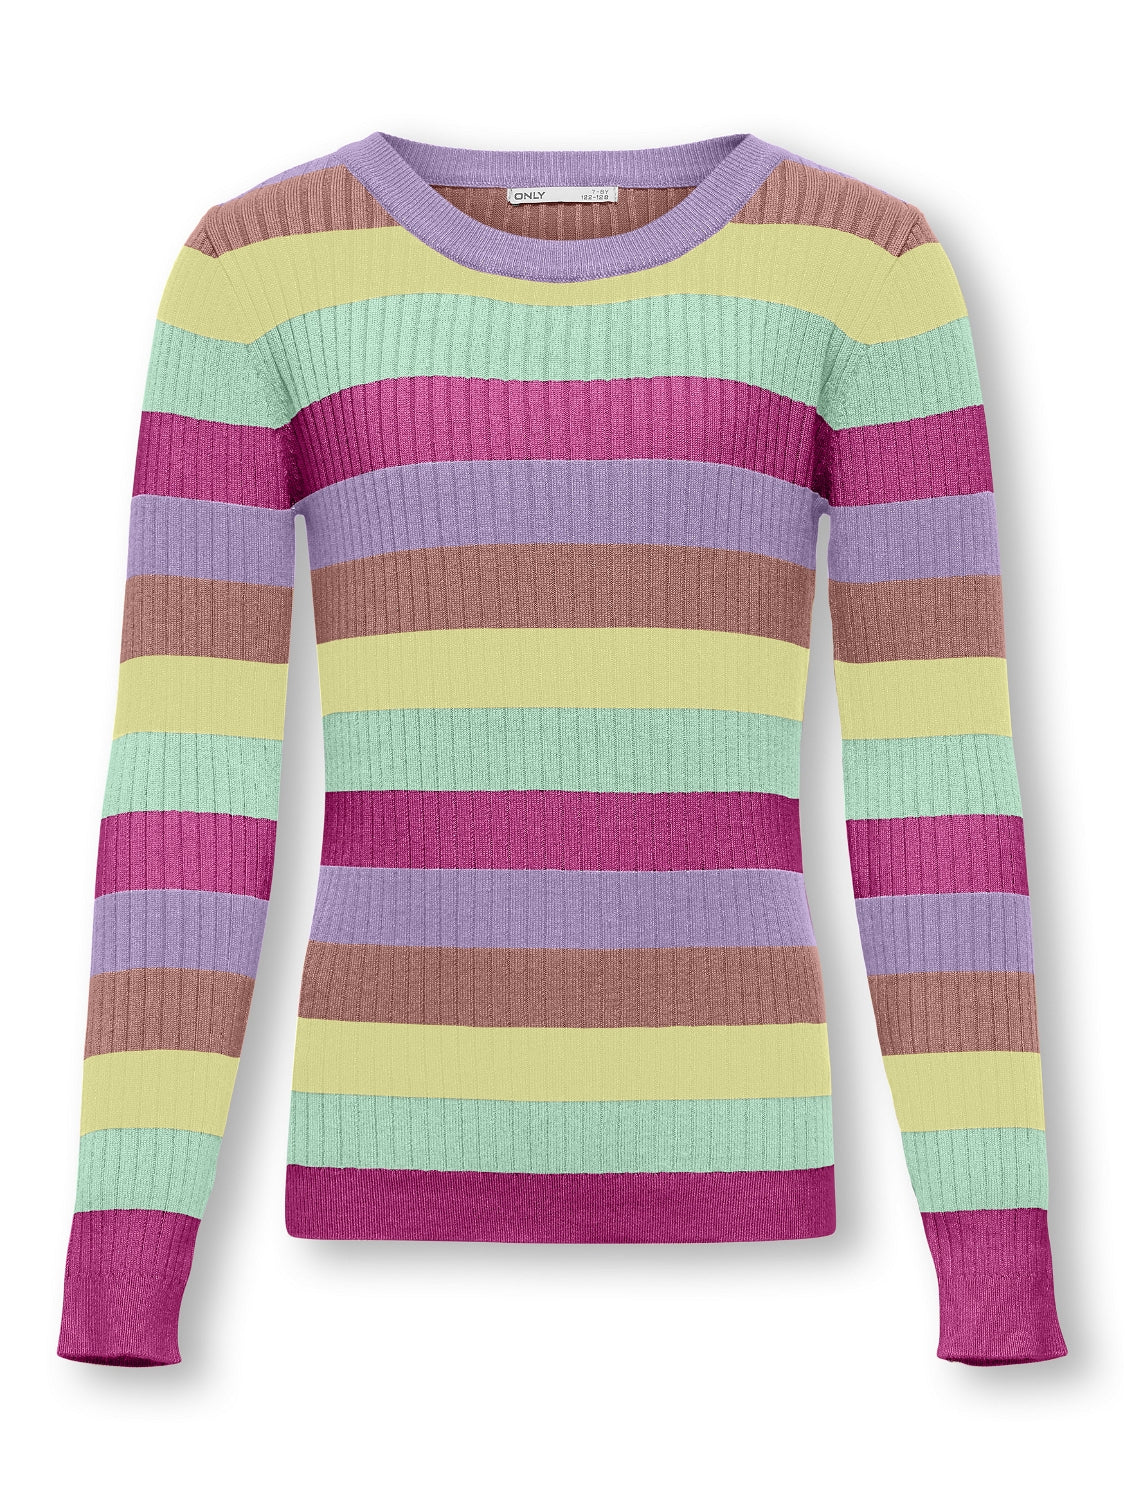 Kids Only Multicoloured Striped Knit Top